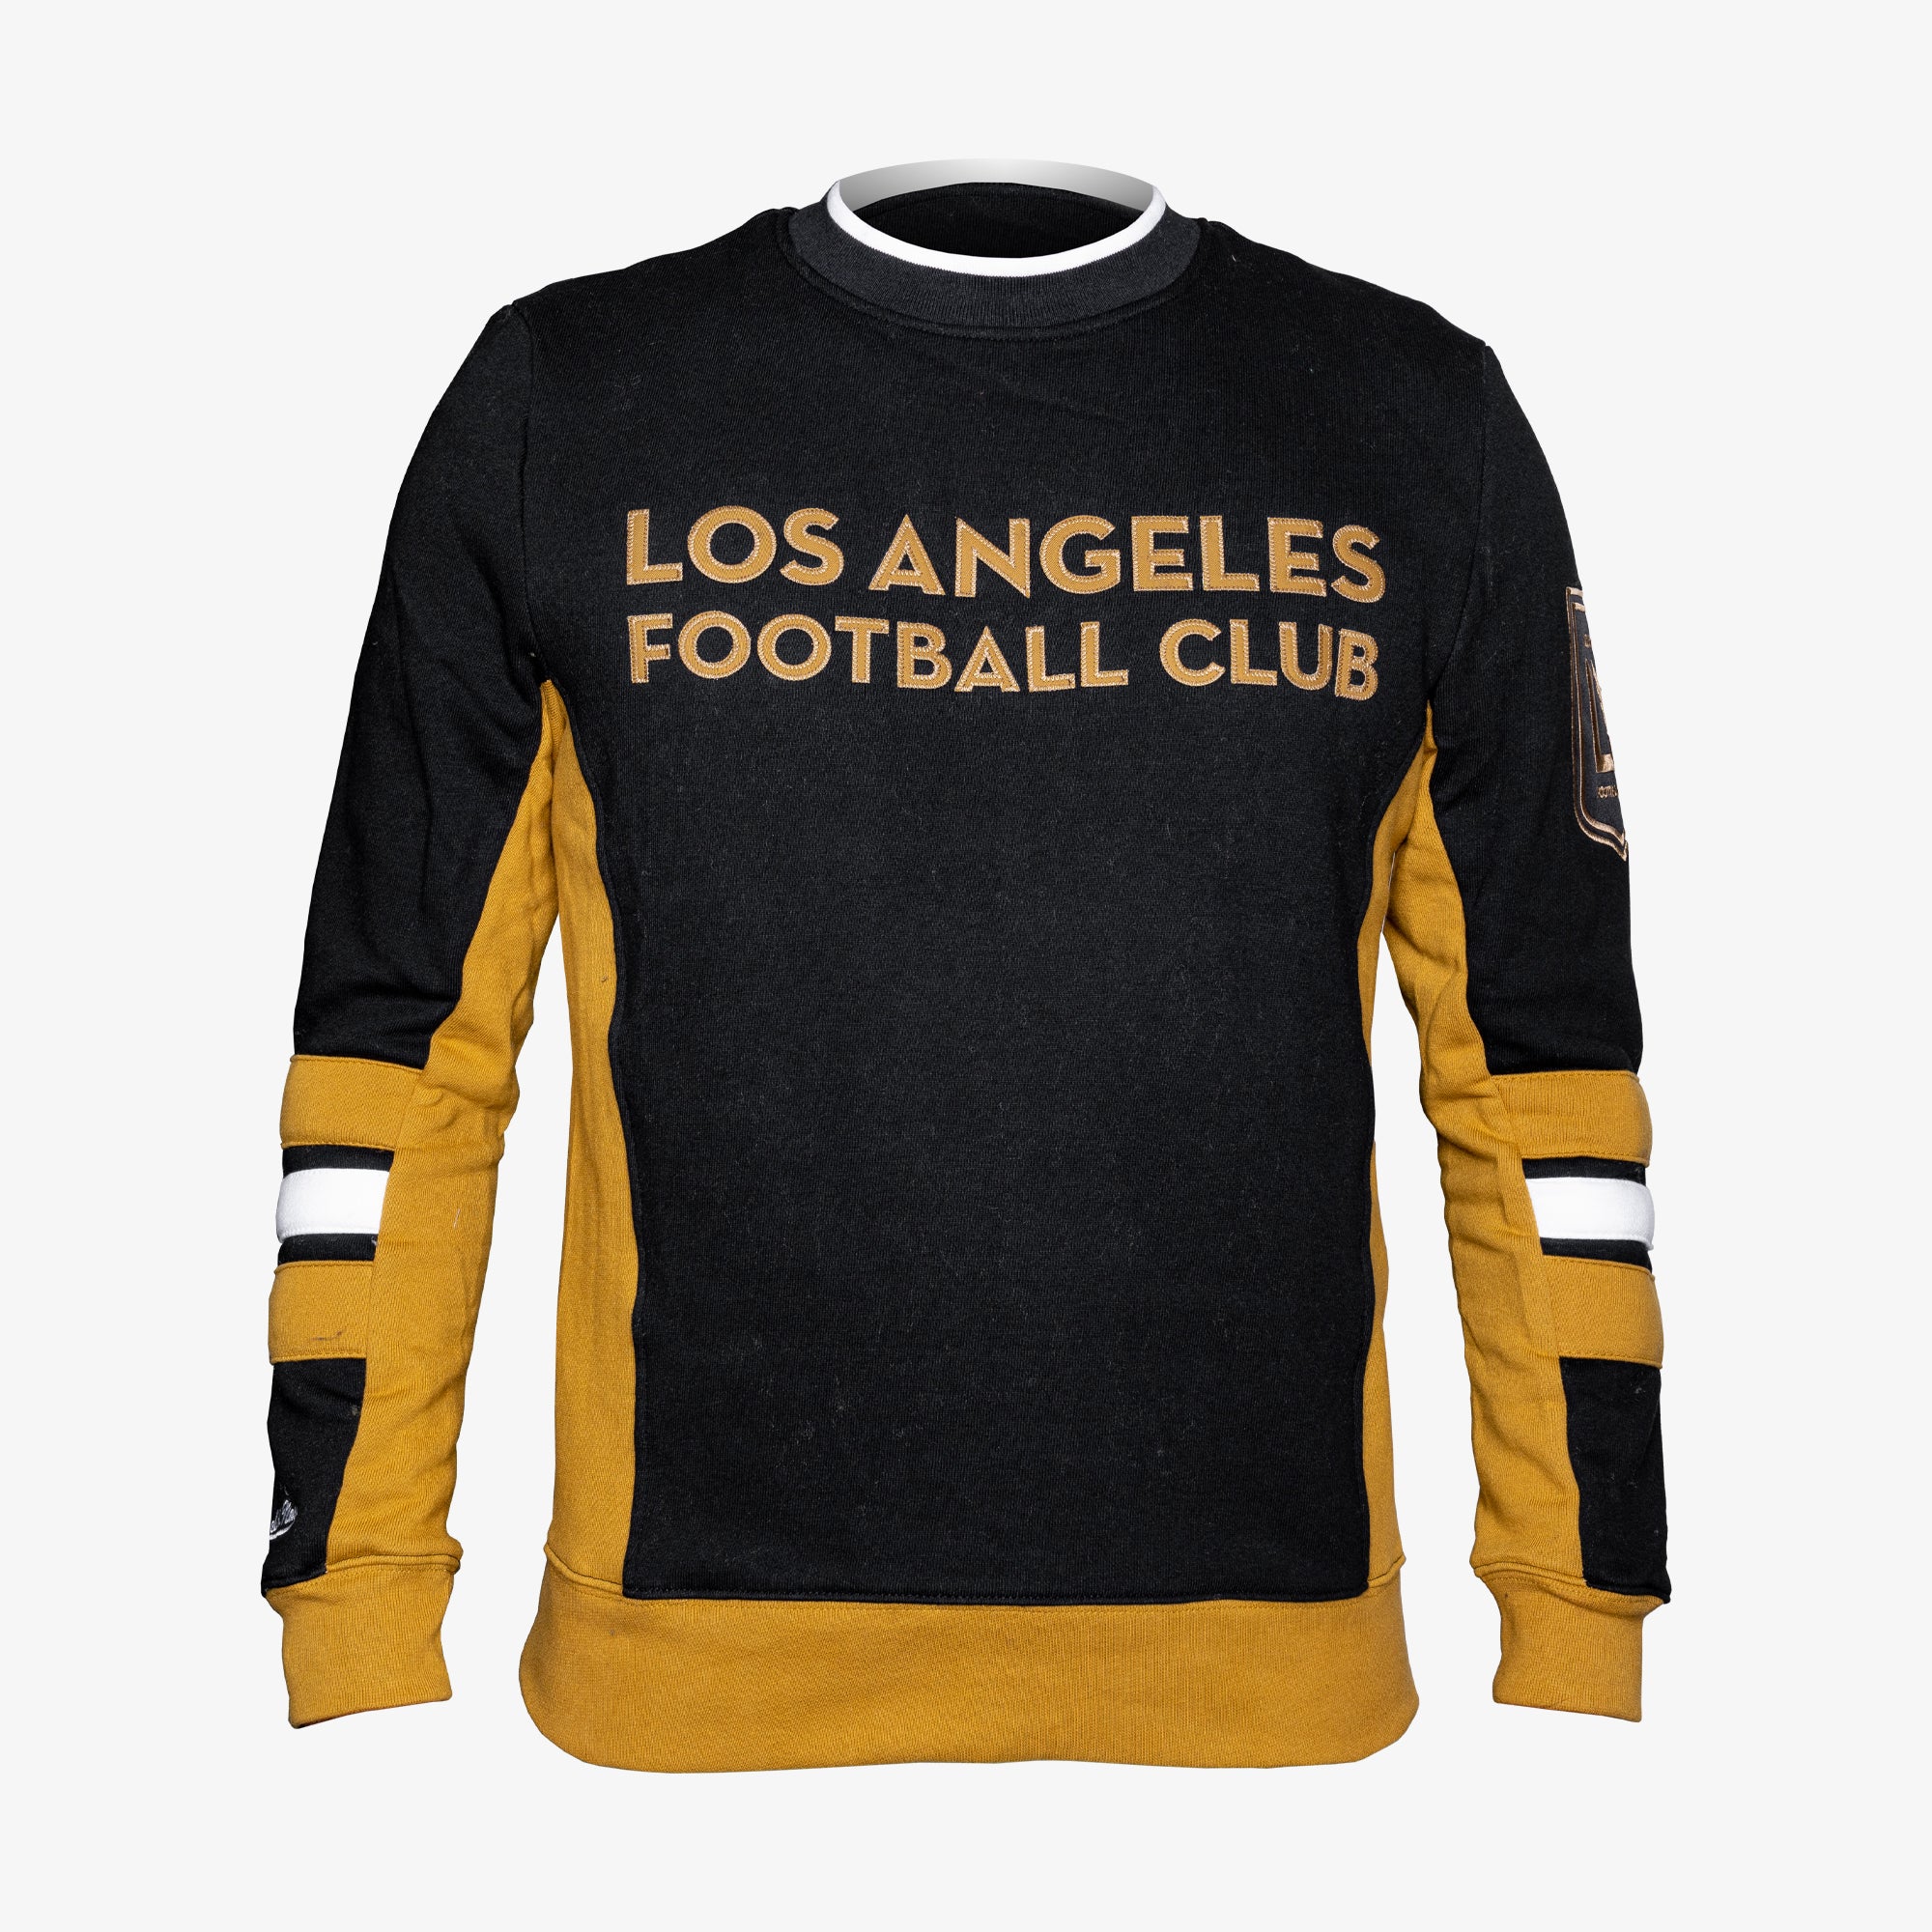 Men's Mitchell & Ness Gold/Black LAFC Play by T-Shirt Size: Medium